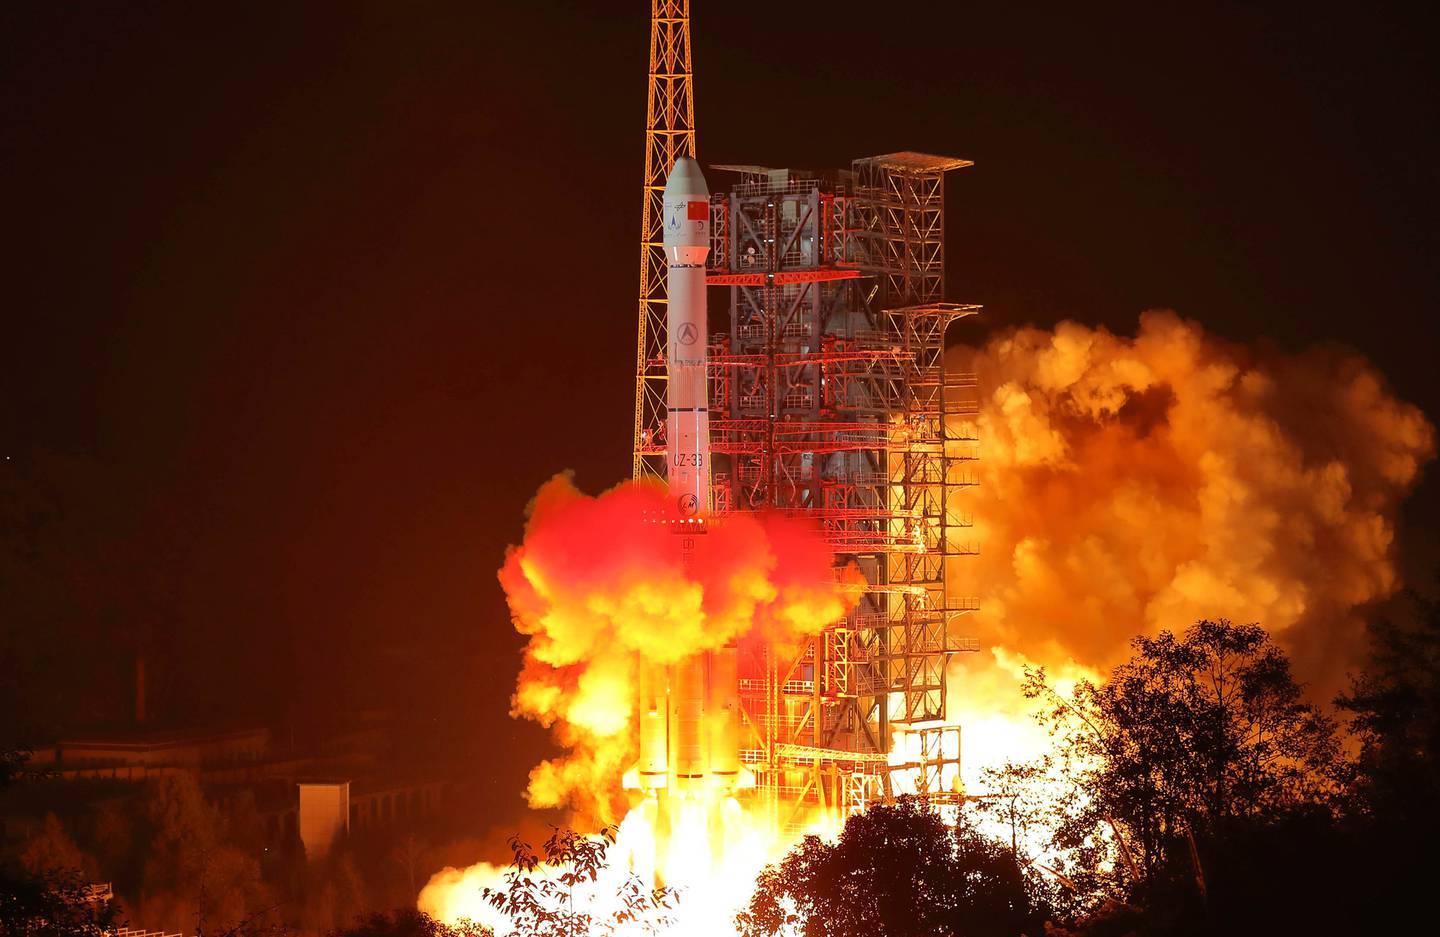 The Chang'e 4 lunar probe launches from the the Xichang Satellite Launch Center in 2018. Photo / AP